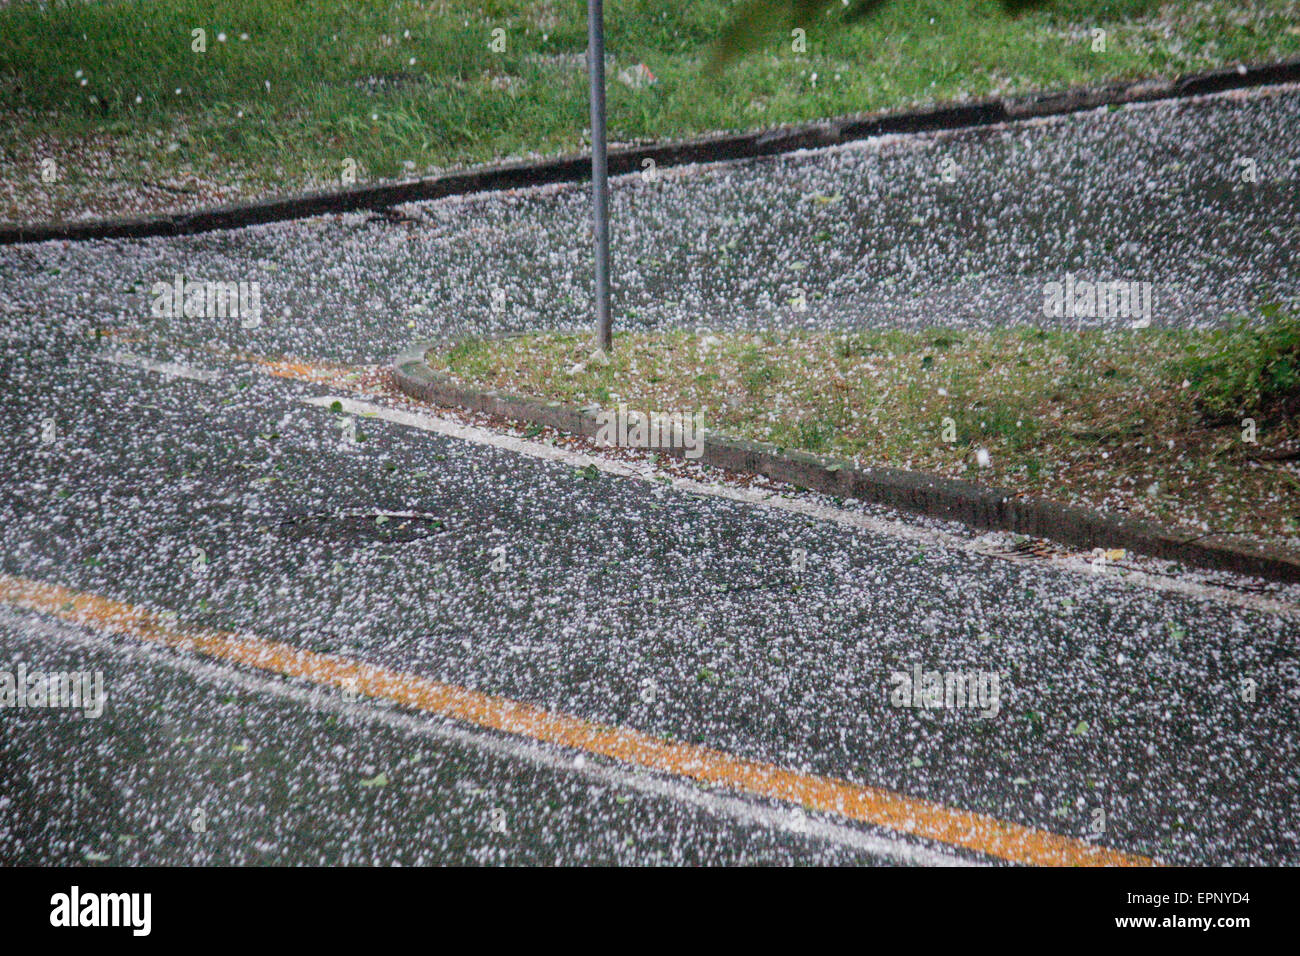 Turin, Italy. 20th May, 2015. A sudden hailstorm hit the city of Turin, making the road surface white as if there was snow. © Elena Aquila/Pacific Press/Alamy Live News Stock Photo